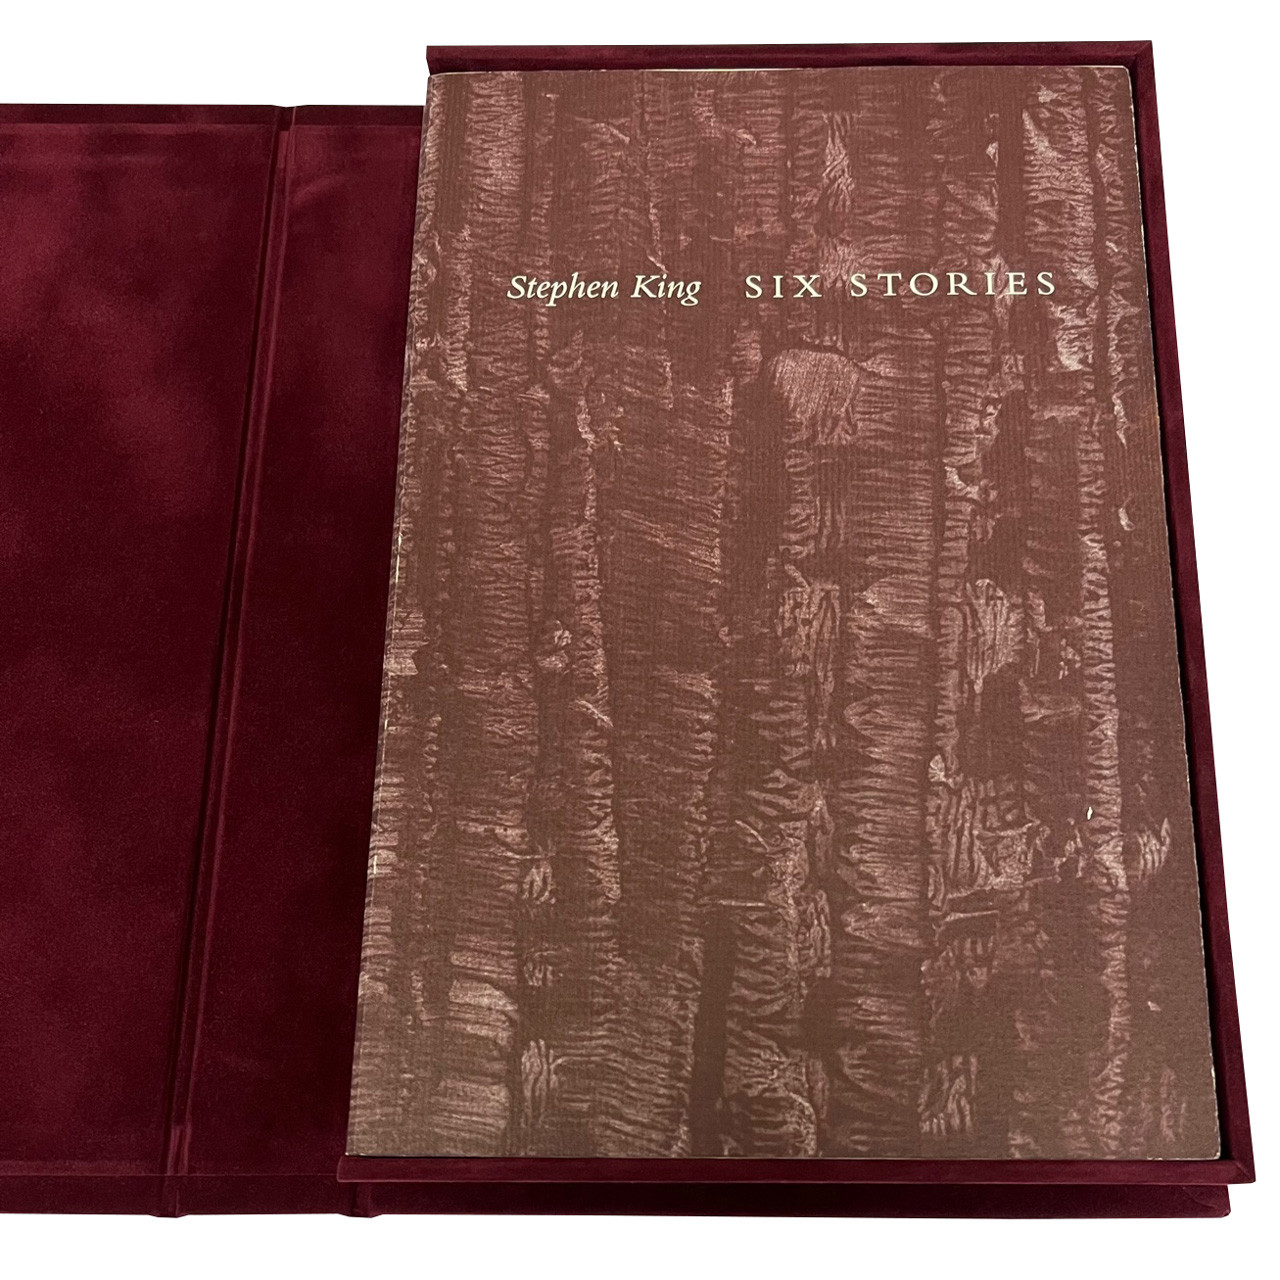 Traycase Presentation Box for Stephen King "SIX STORIES" Signed Limited Edition [NO BOOK INCLUDED]